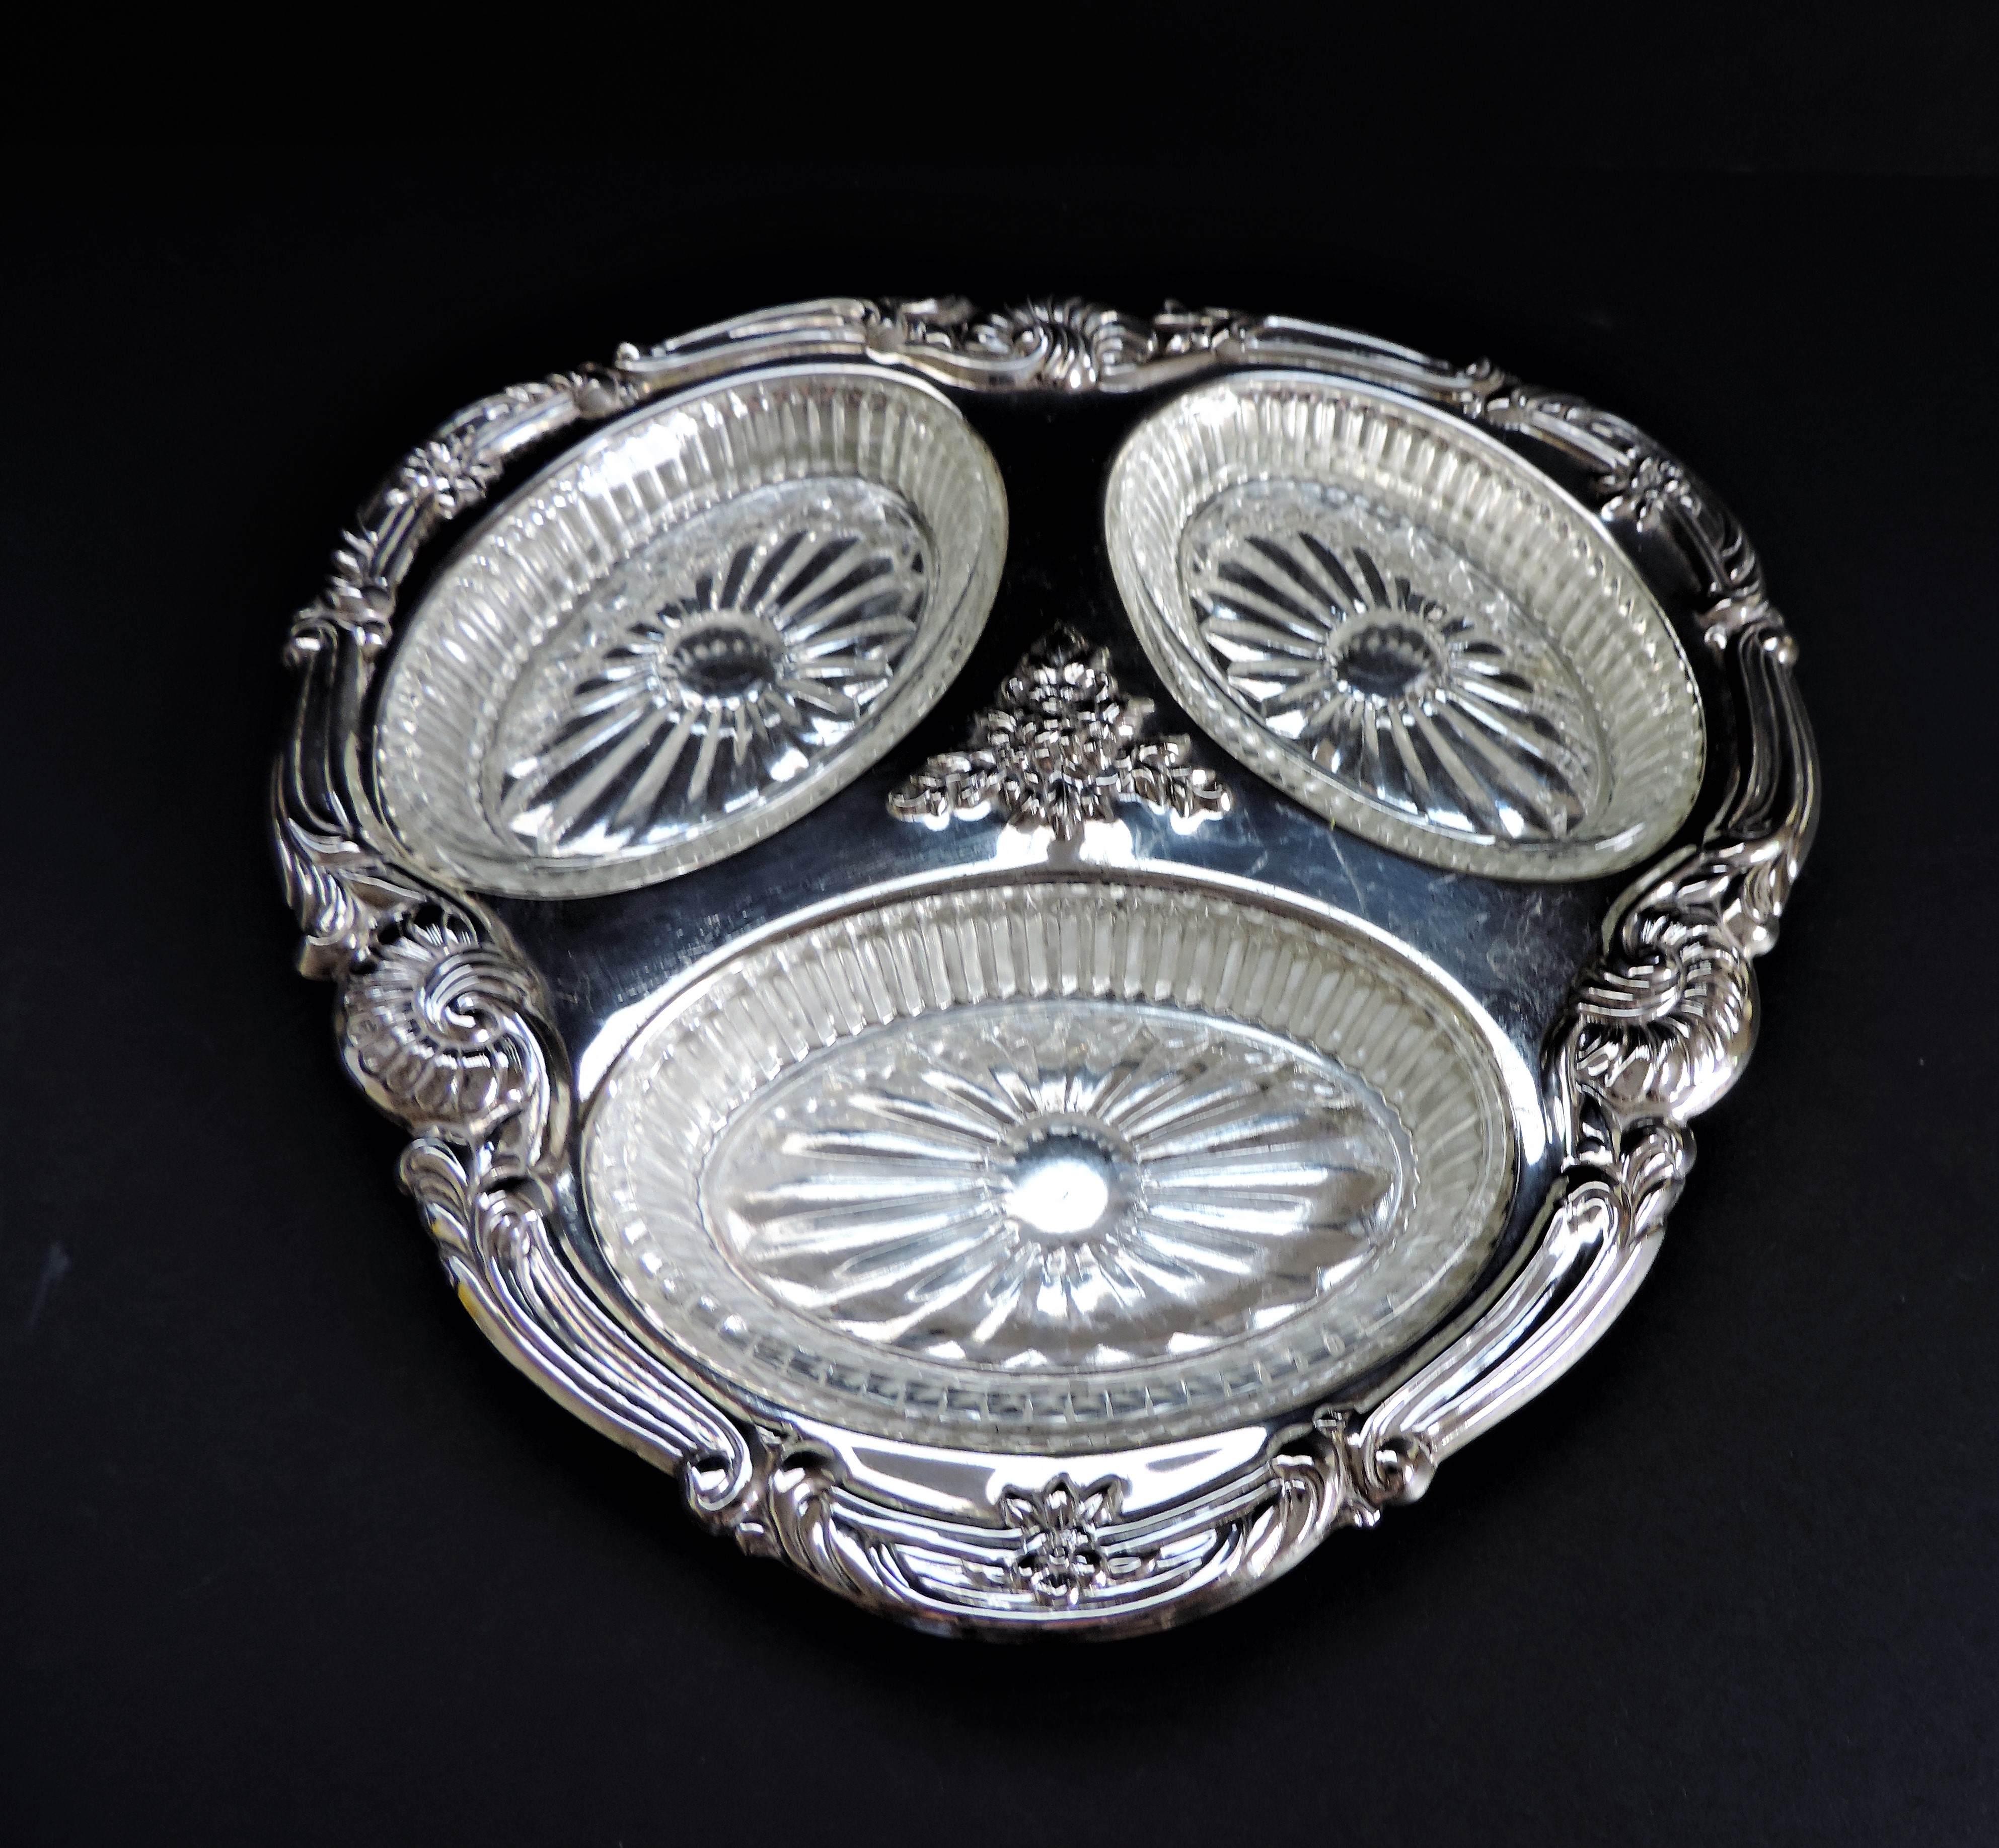 Vintage Silver Plate Hors d'oeuvres Serving Dish - Image 3 of 4